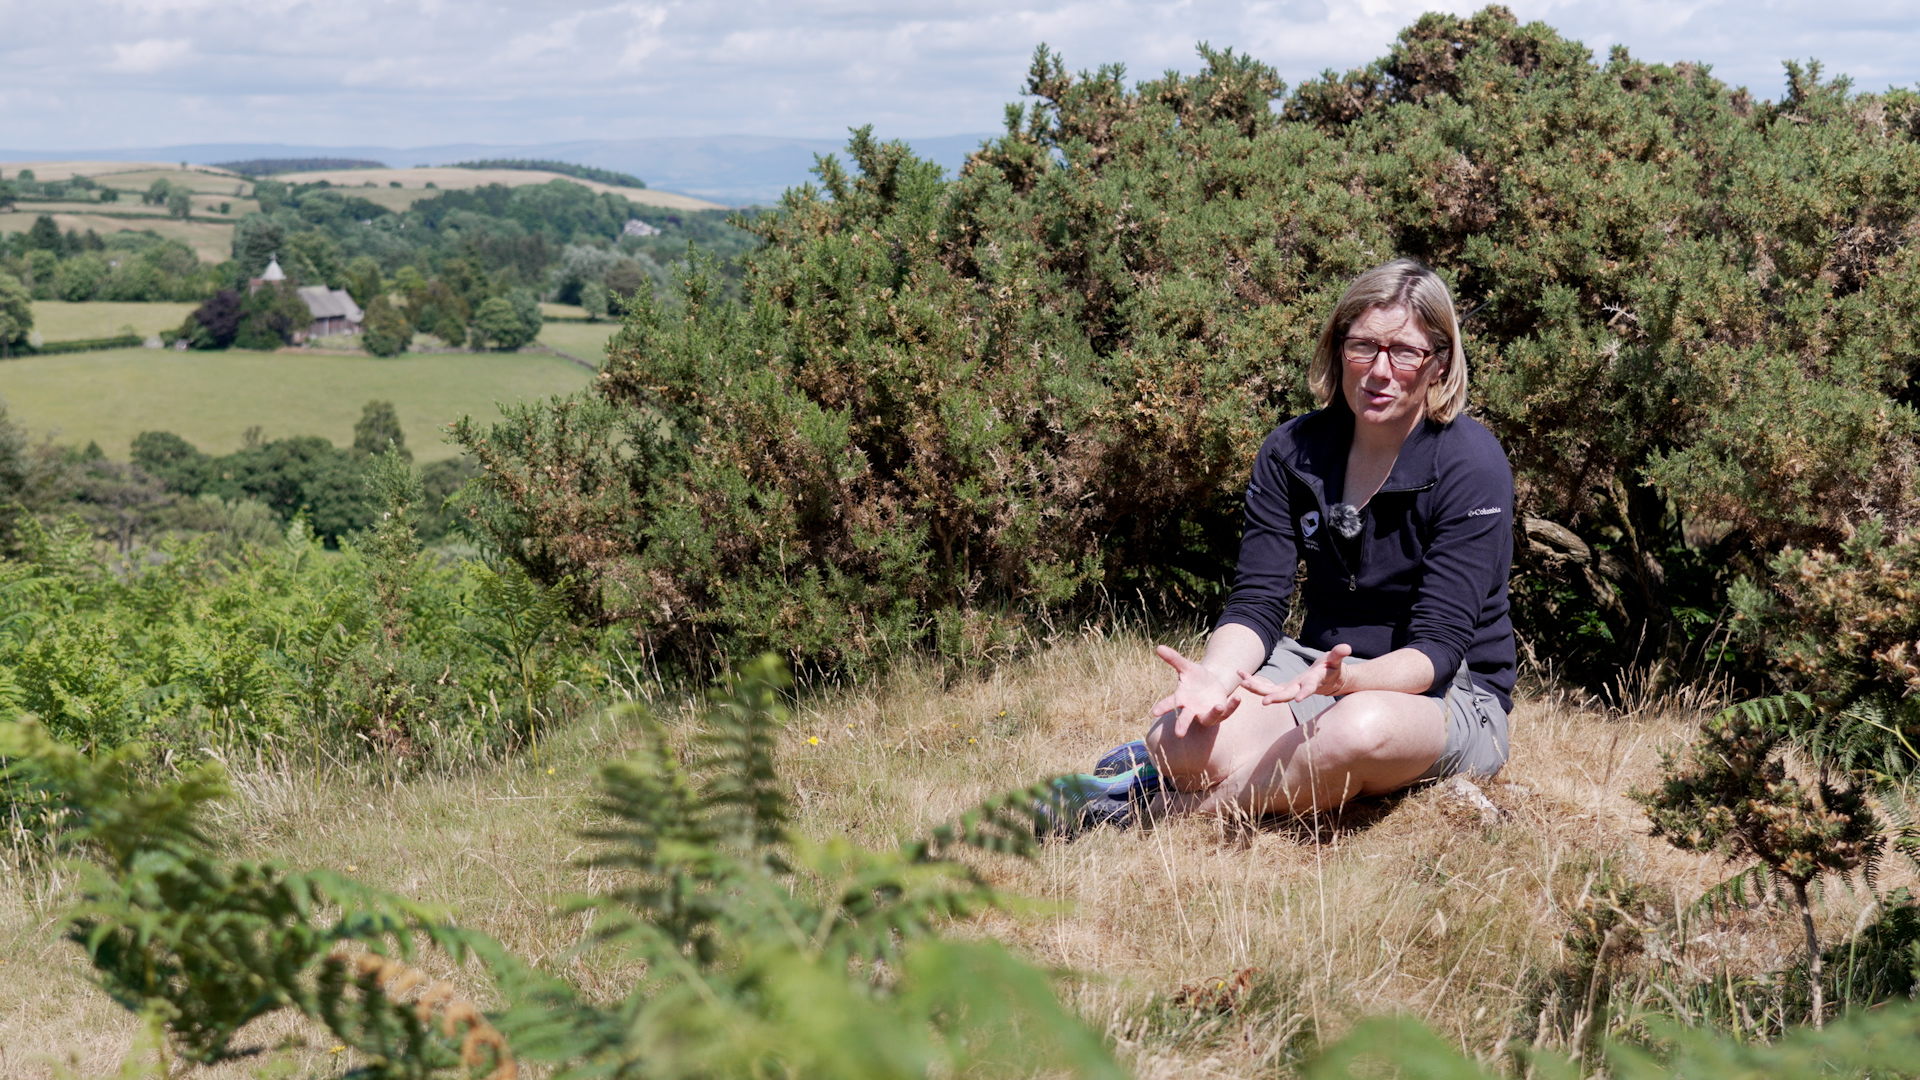 A woman sits on a patch of parched grass with a gorse bush behind her